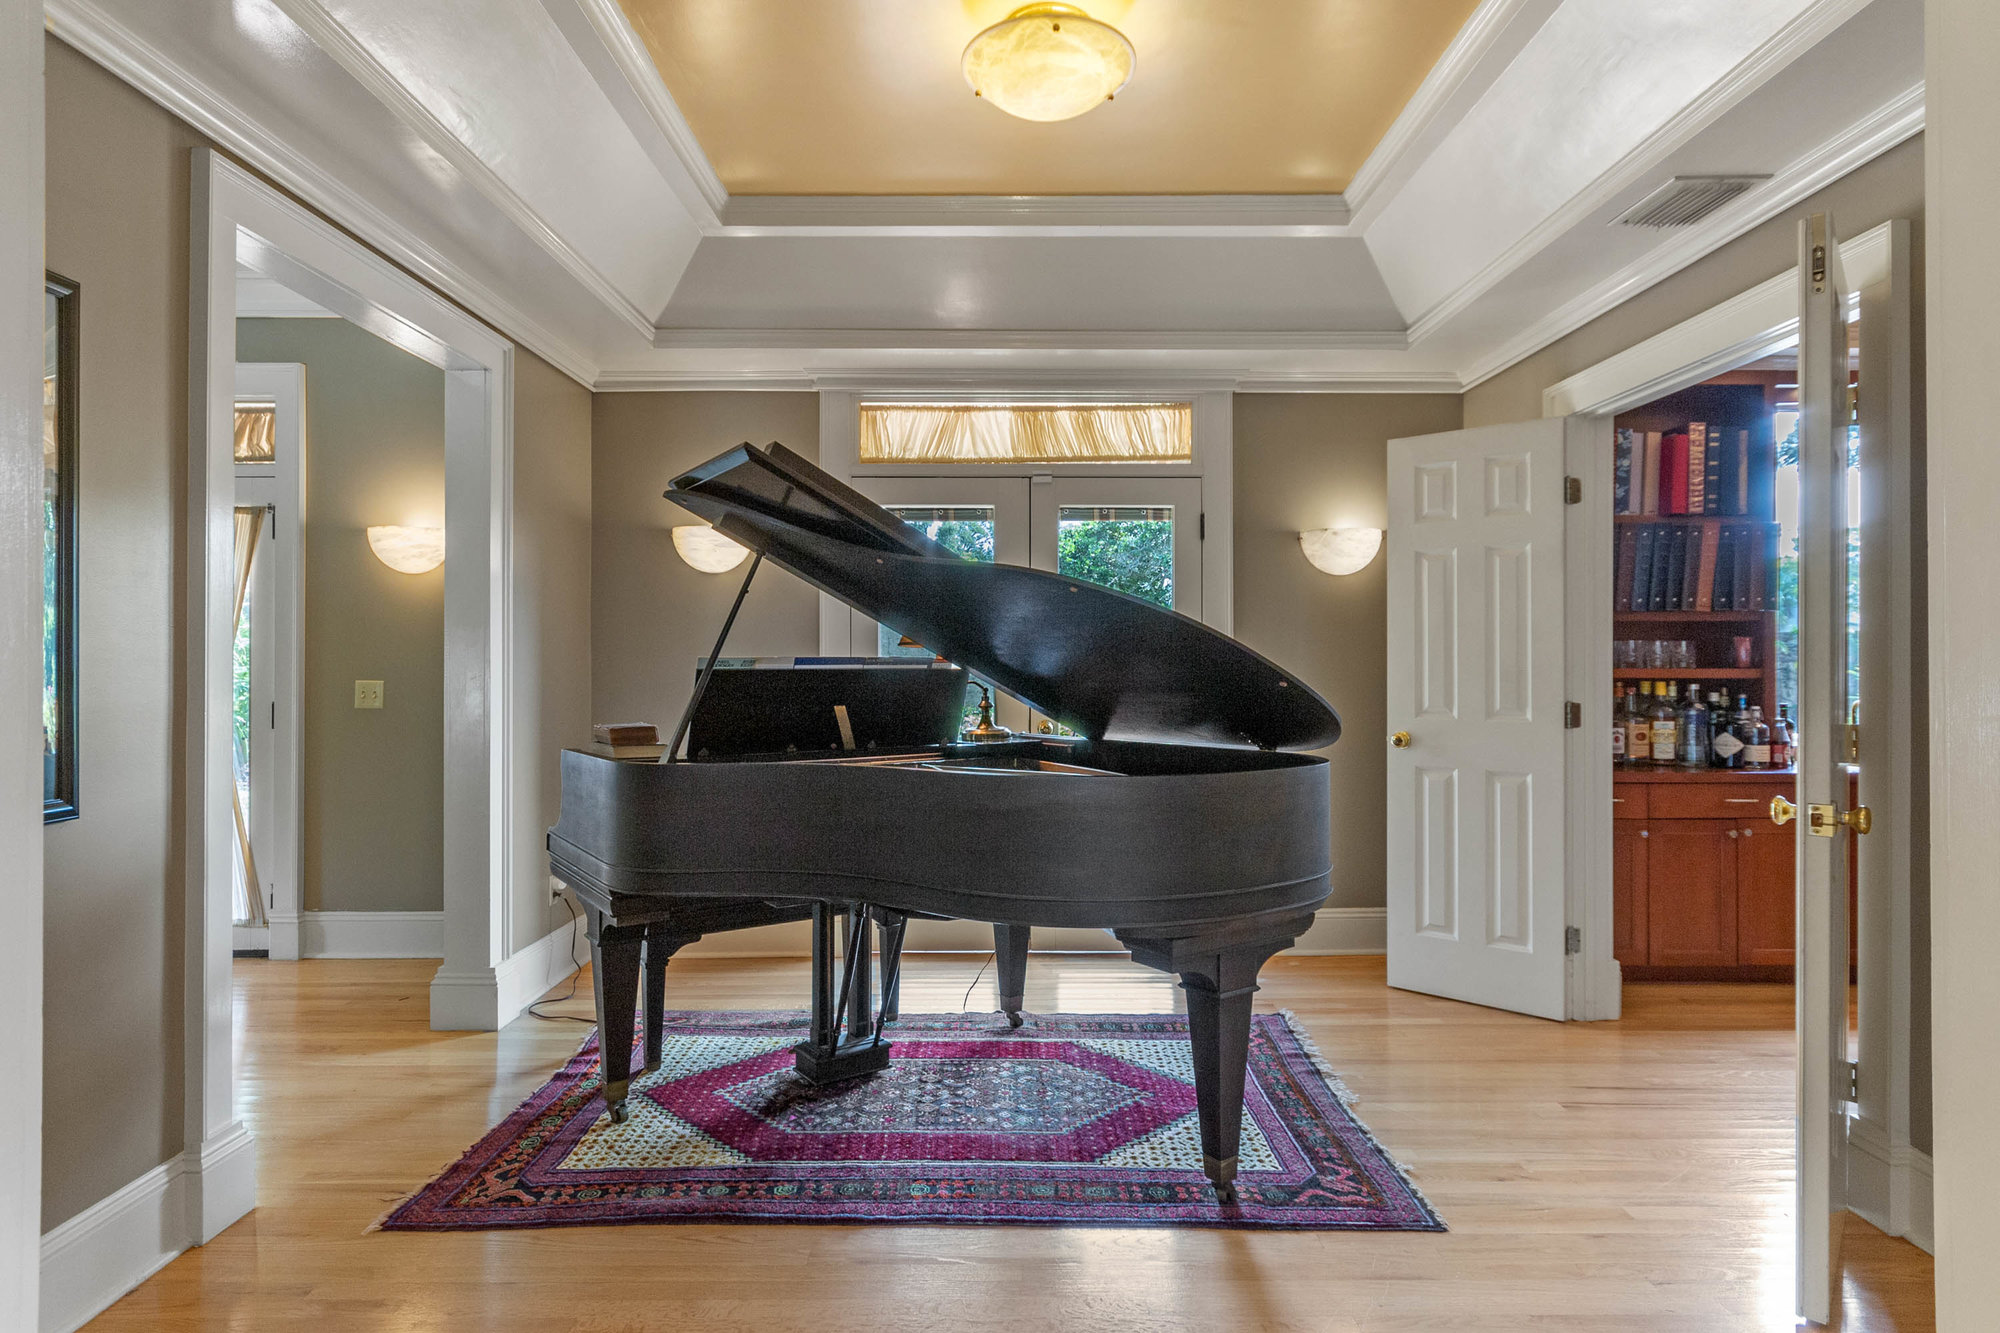 room with black grand piano in center